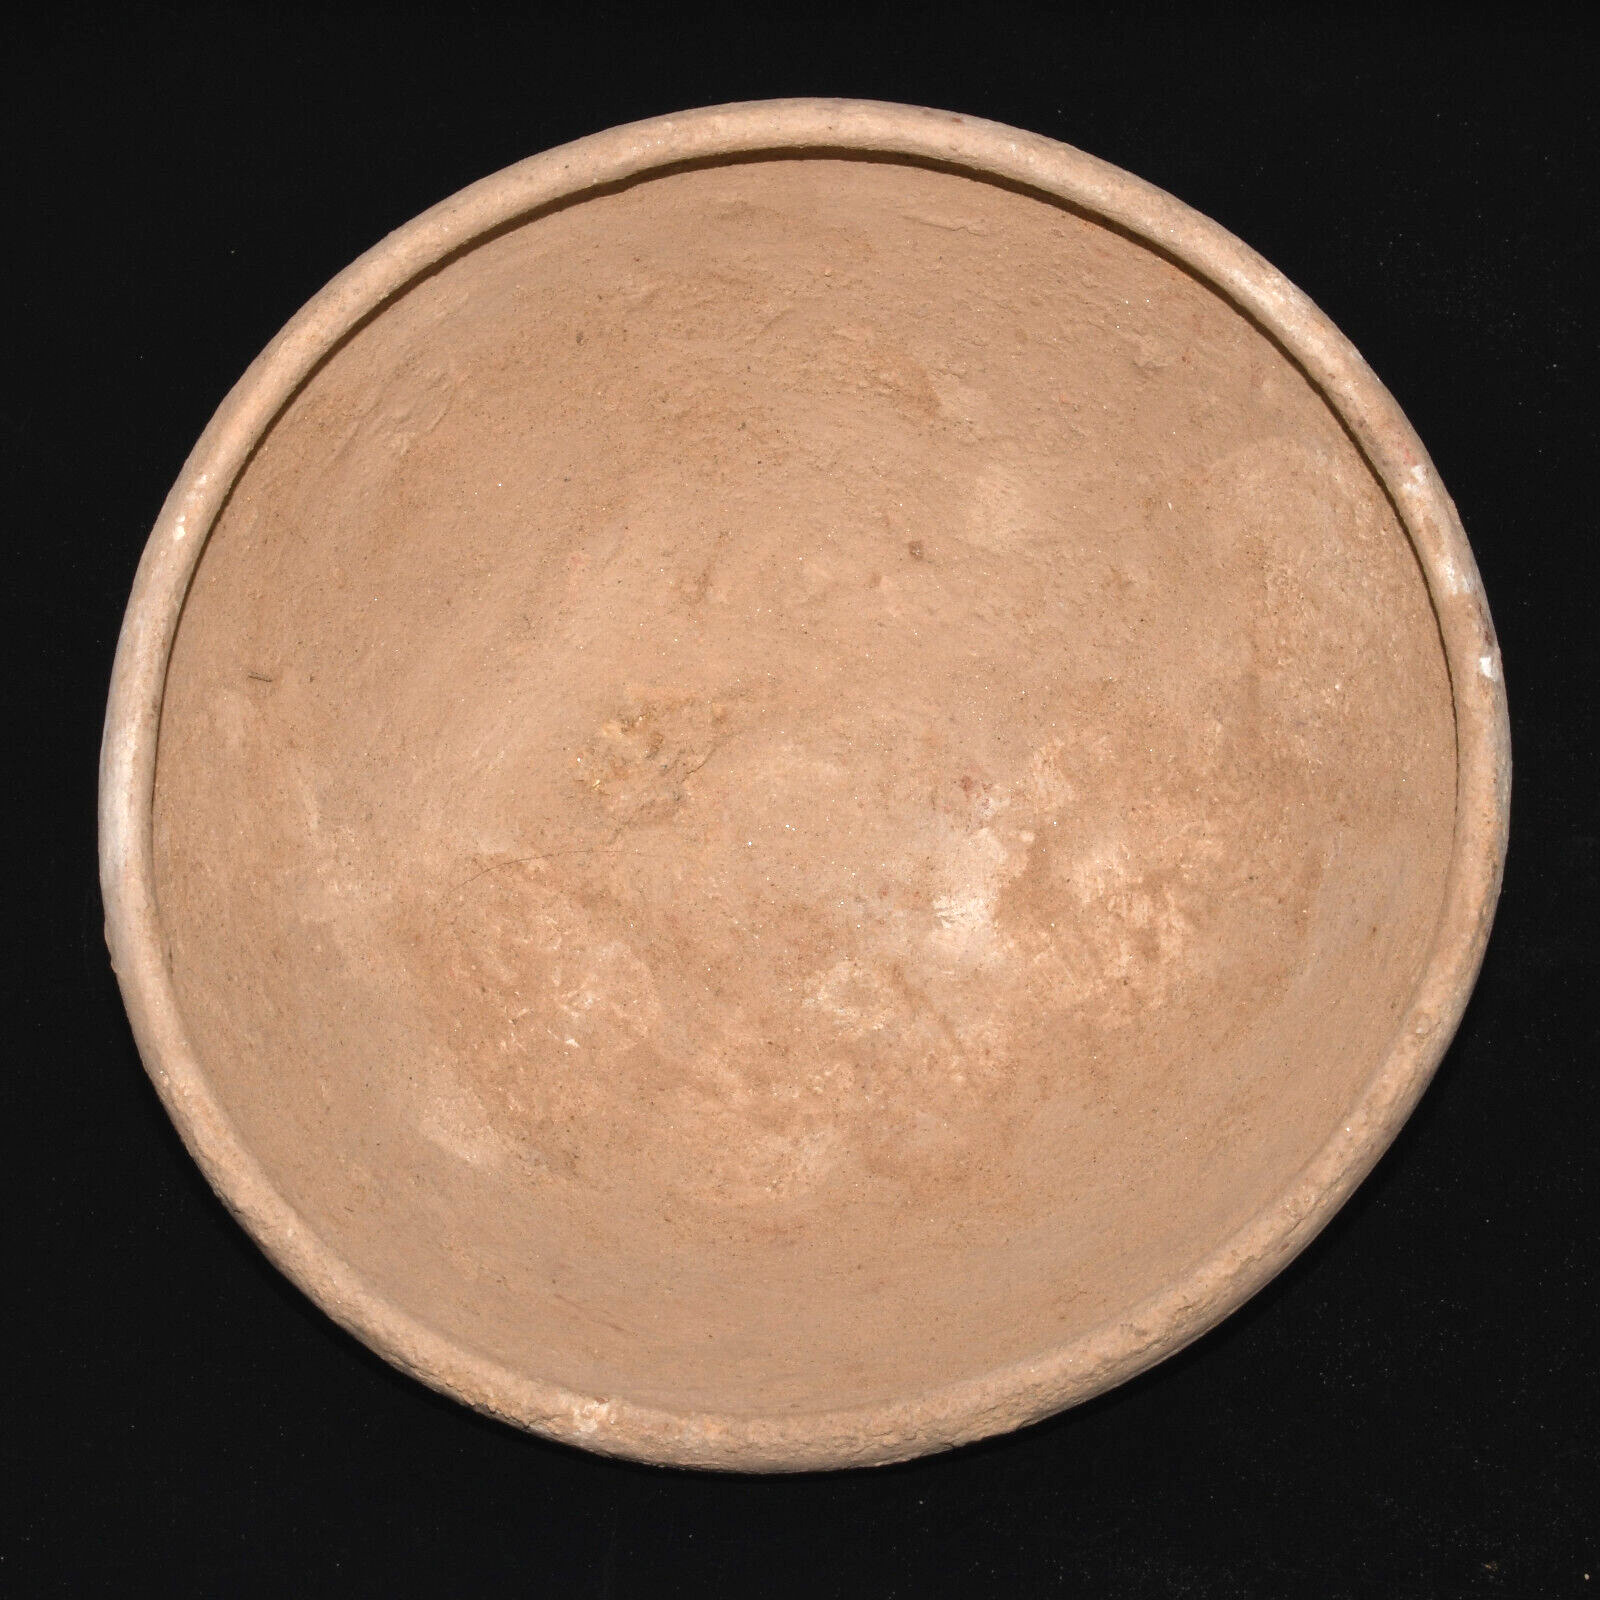 Large Ancient Indus Valley Civilization Terracotta Bowl in Perfect Condition